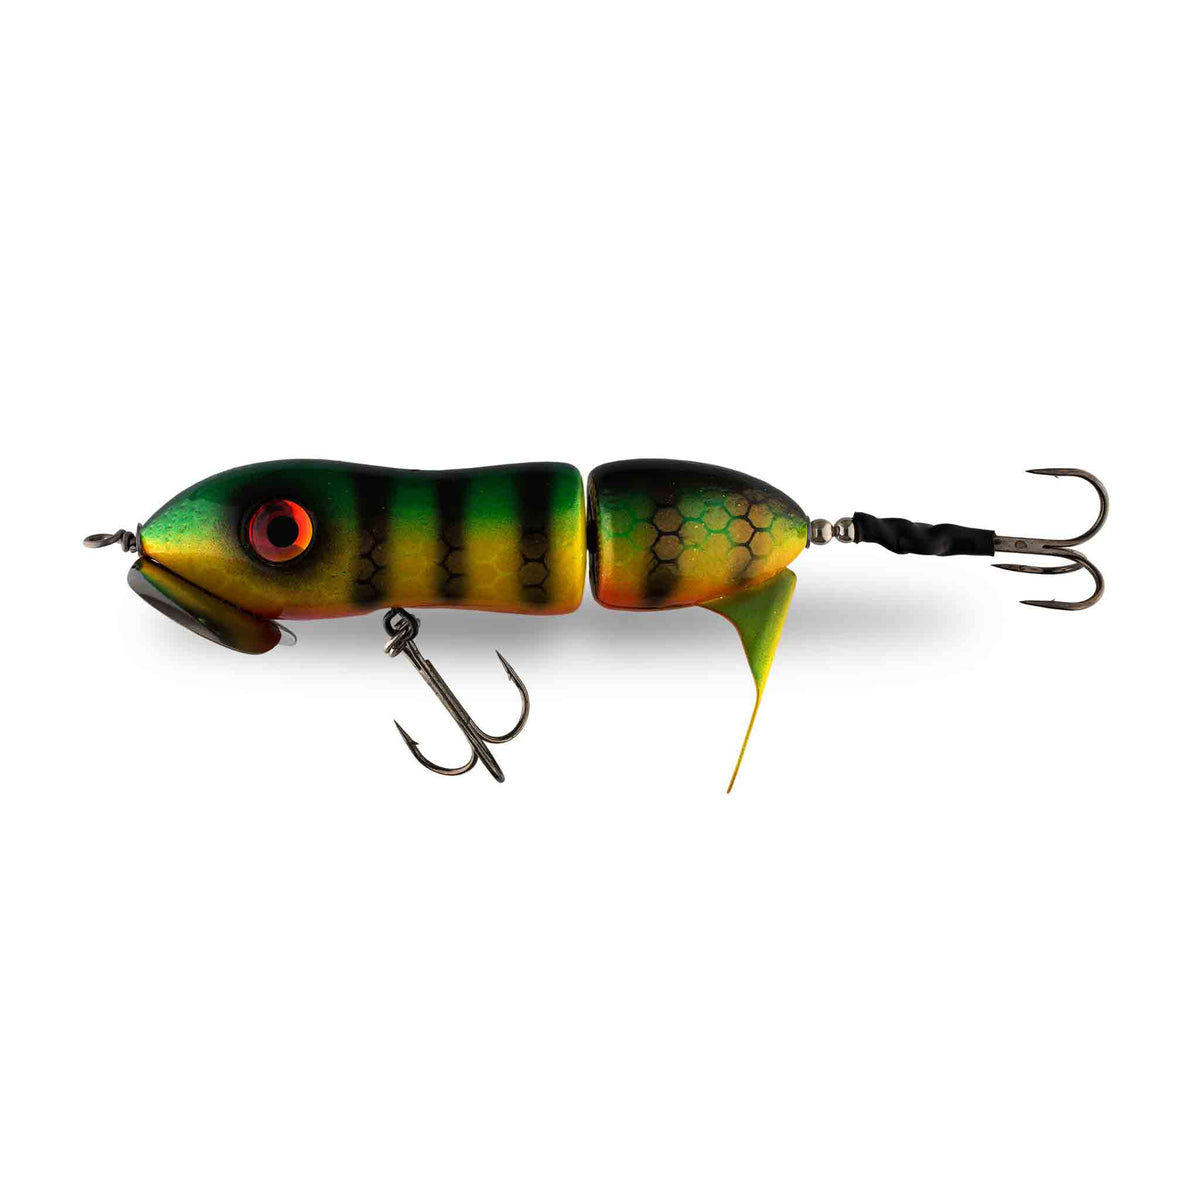 View of Topwater Big Mama Obnoxious "B" Propbait Round Lake Perch available at EZOKO Pike and Musky Shop